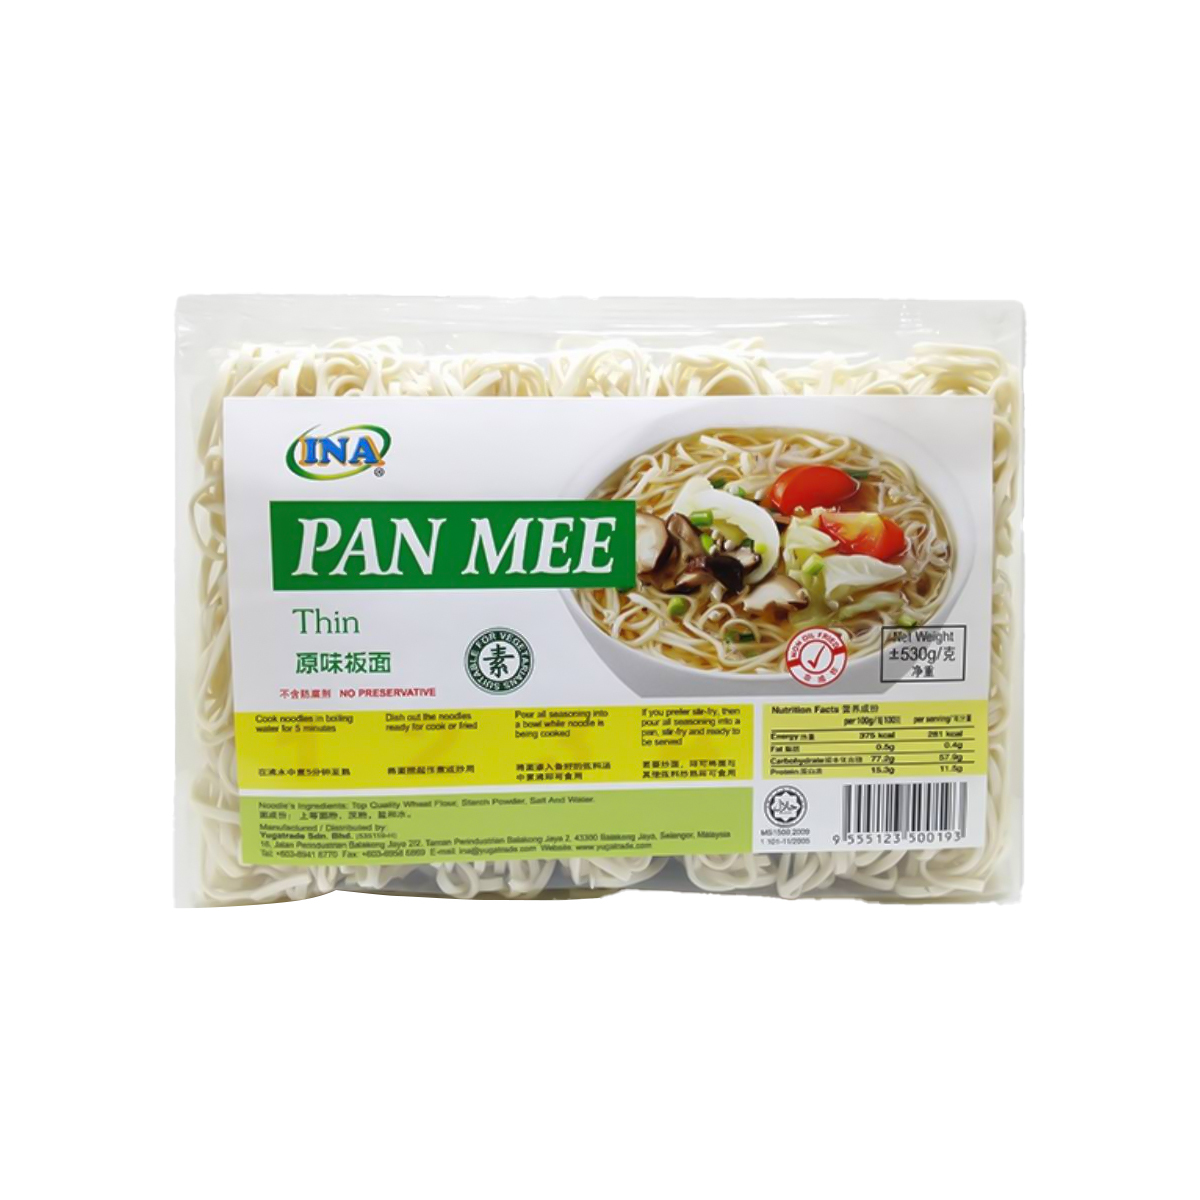 Ina Pan Mee Thin Noodle 530g